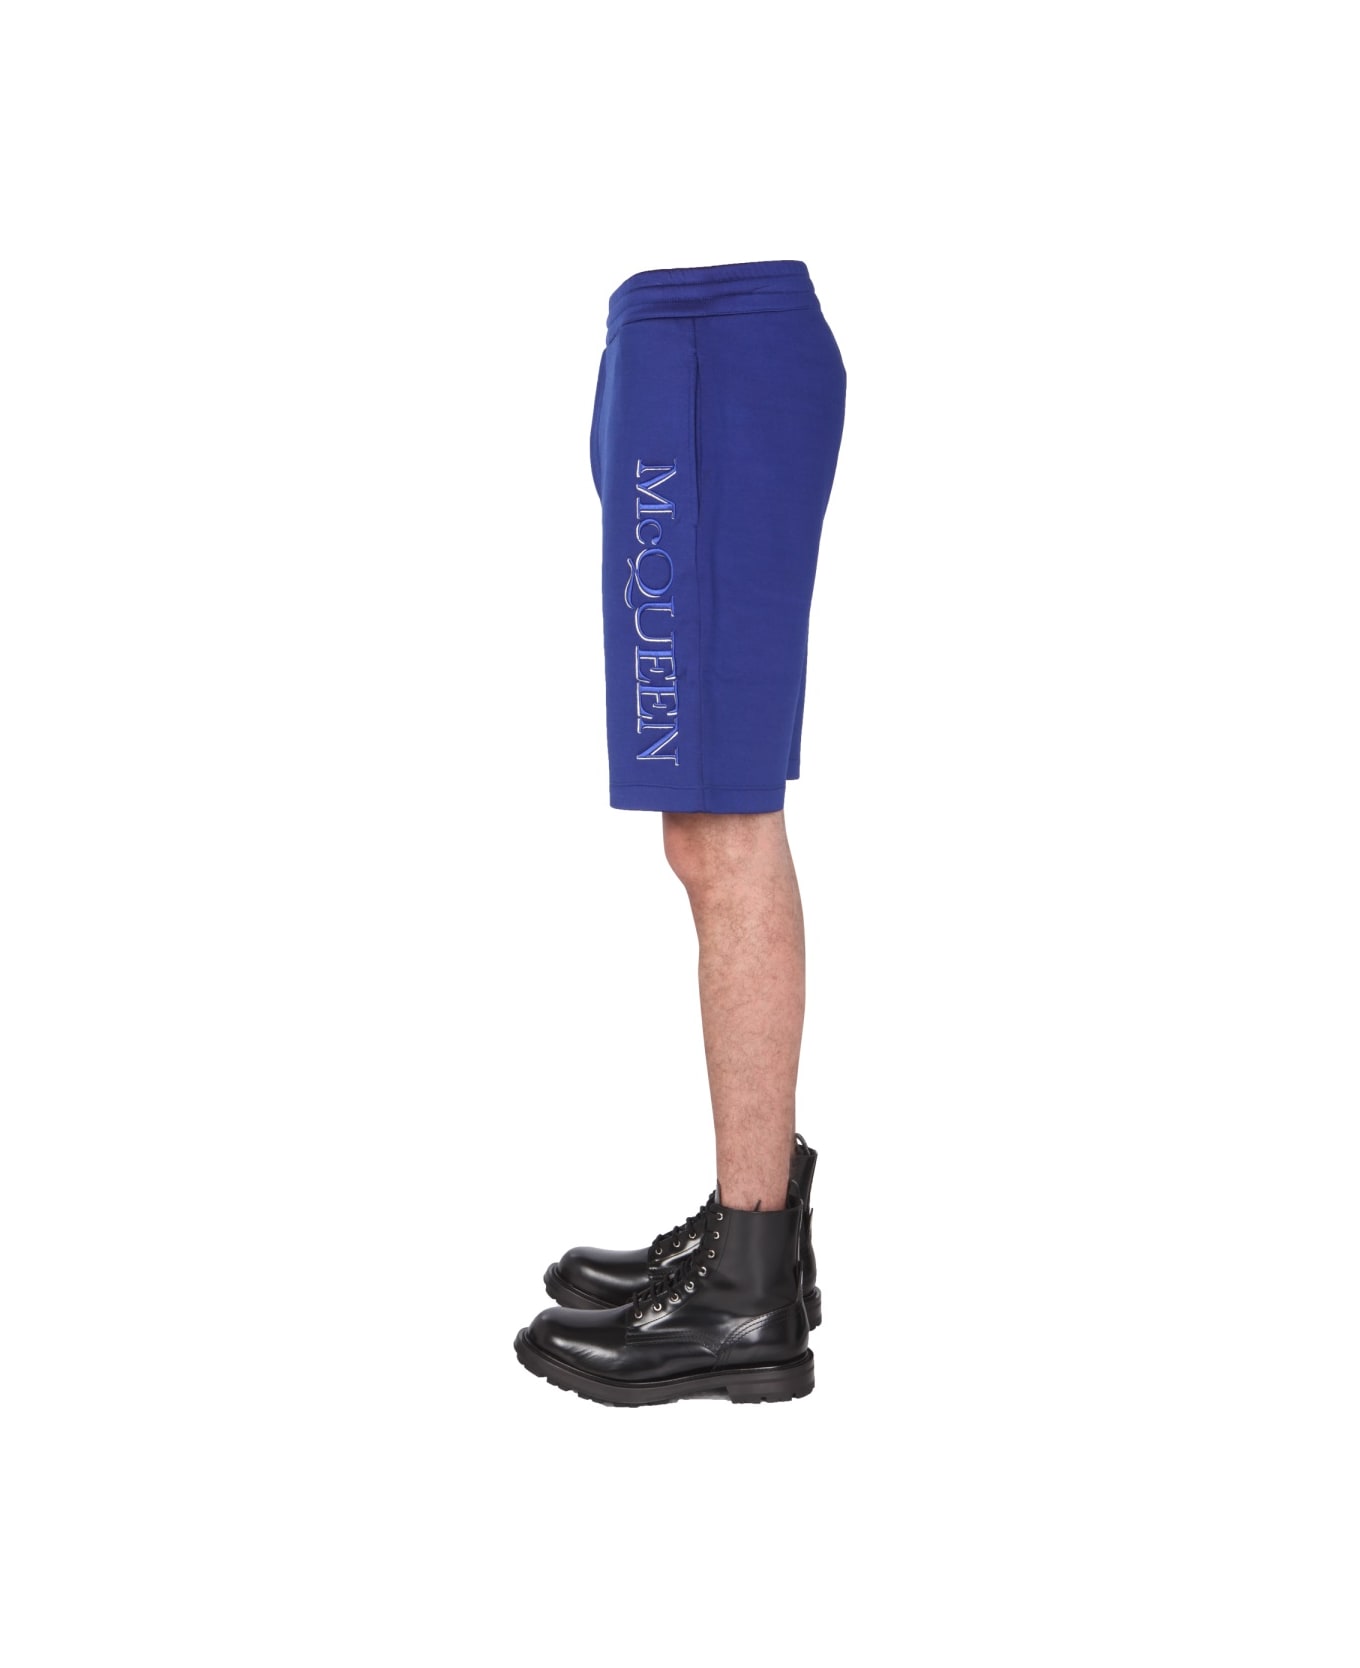 Alexander McQueen Shorts With Embroidered Logo - BLUE ショートパンツ